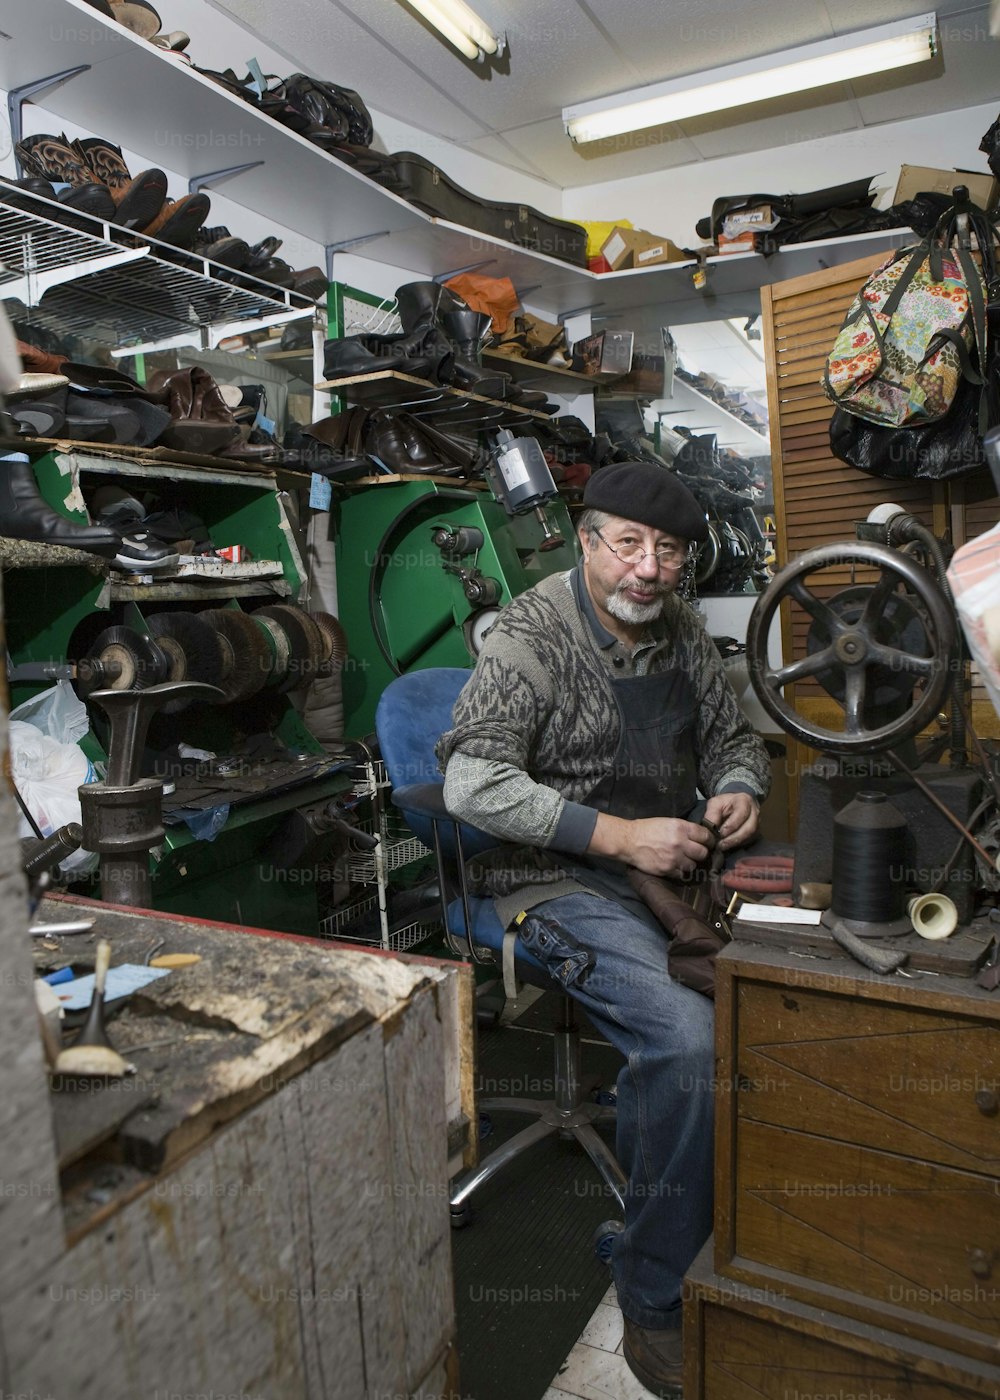 a man working on a sewing machine in a shop